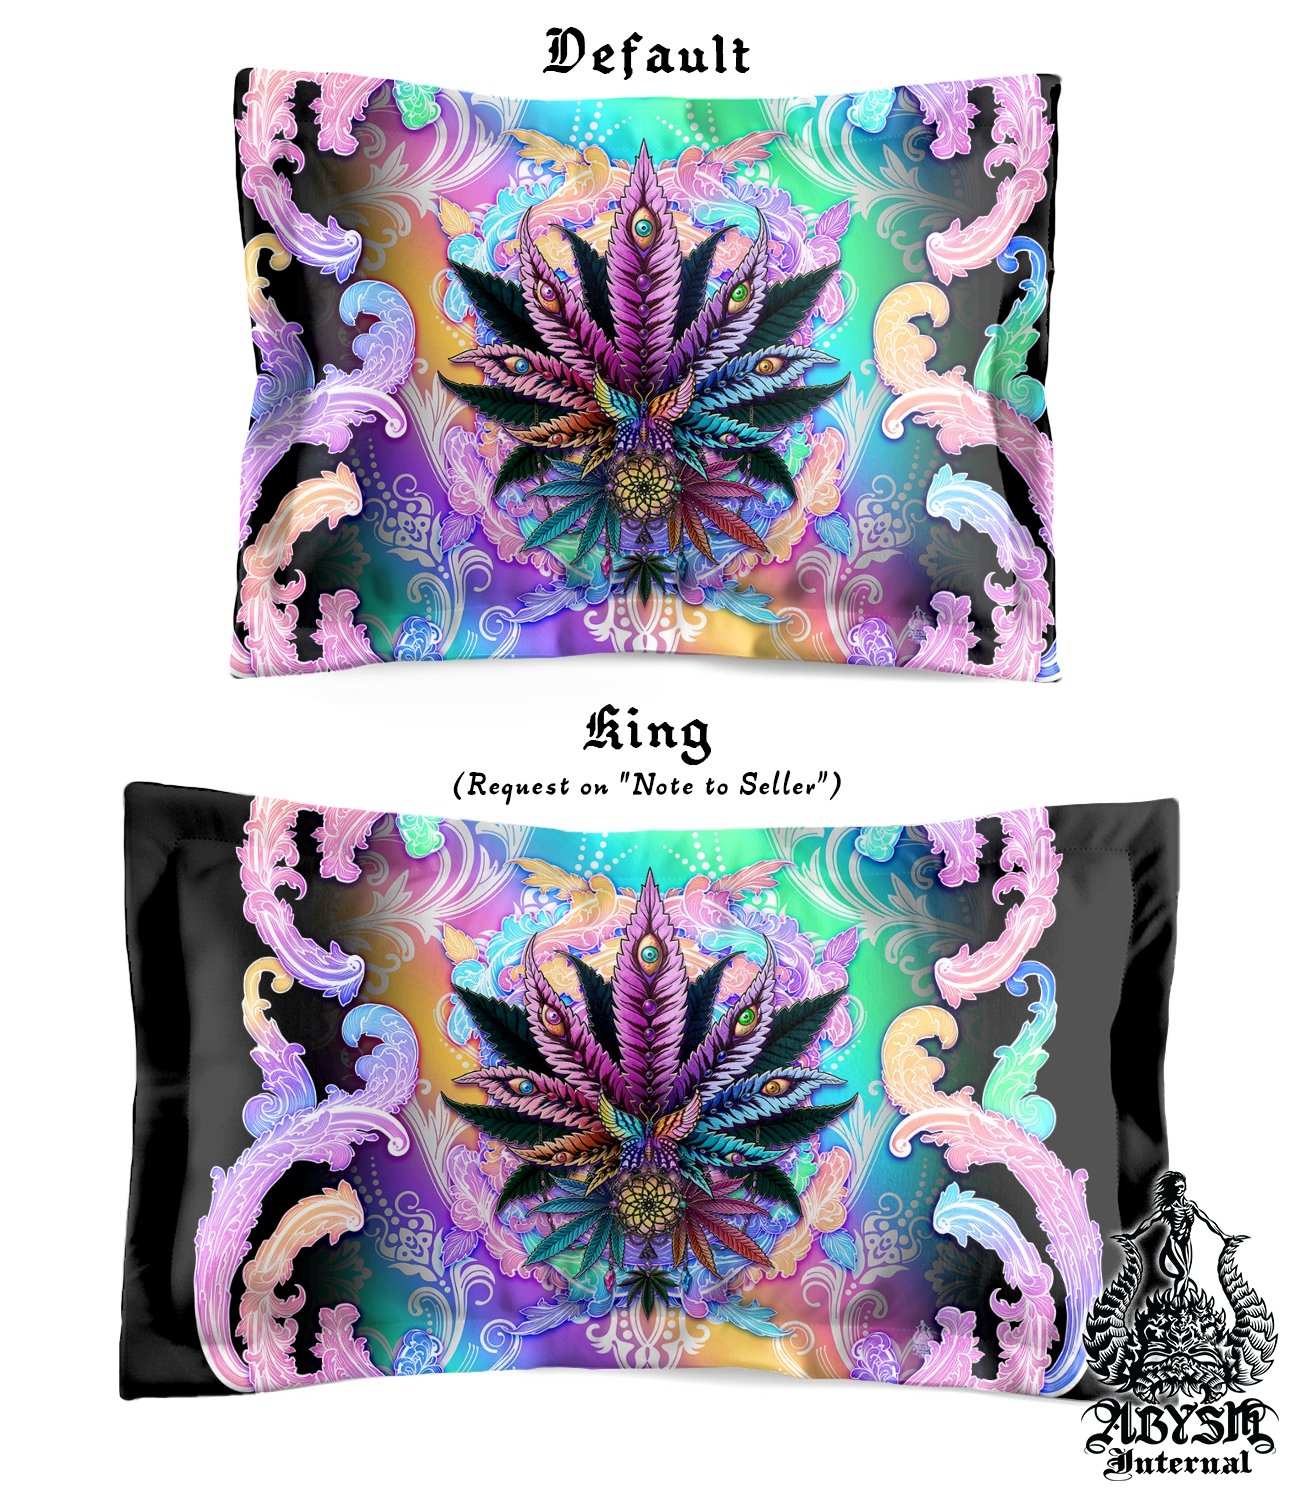 Weed Bedding Set, Comforter and Duvet, Aesthetic Bed Cover, Psychedelic Girl Bedroom Decor, King, Queen and Twin Size, 420 Cannabis Room Art - Marijuana Pastel Black - Abysm Internal